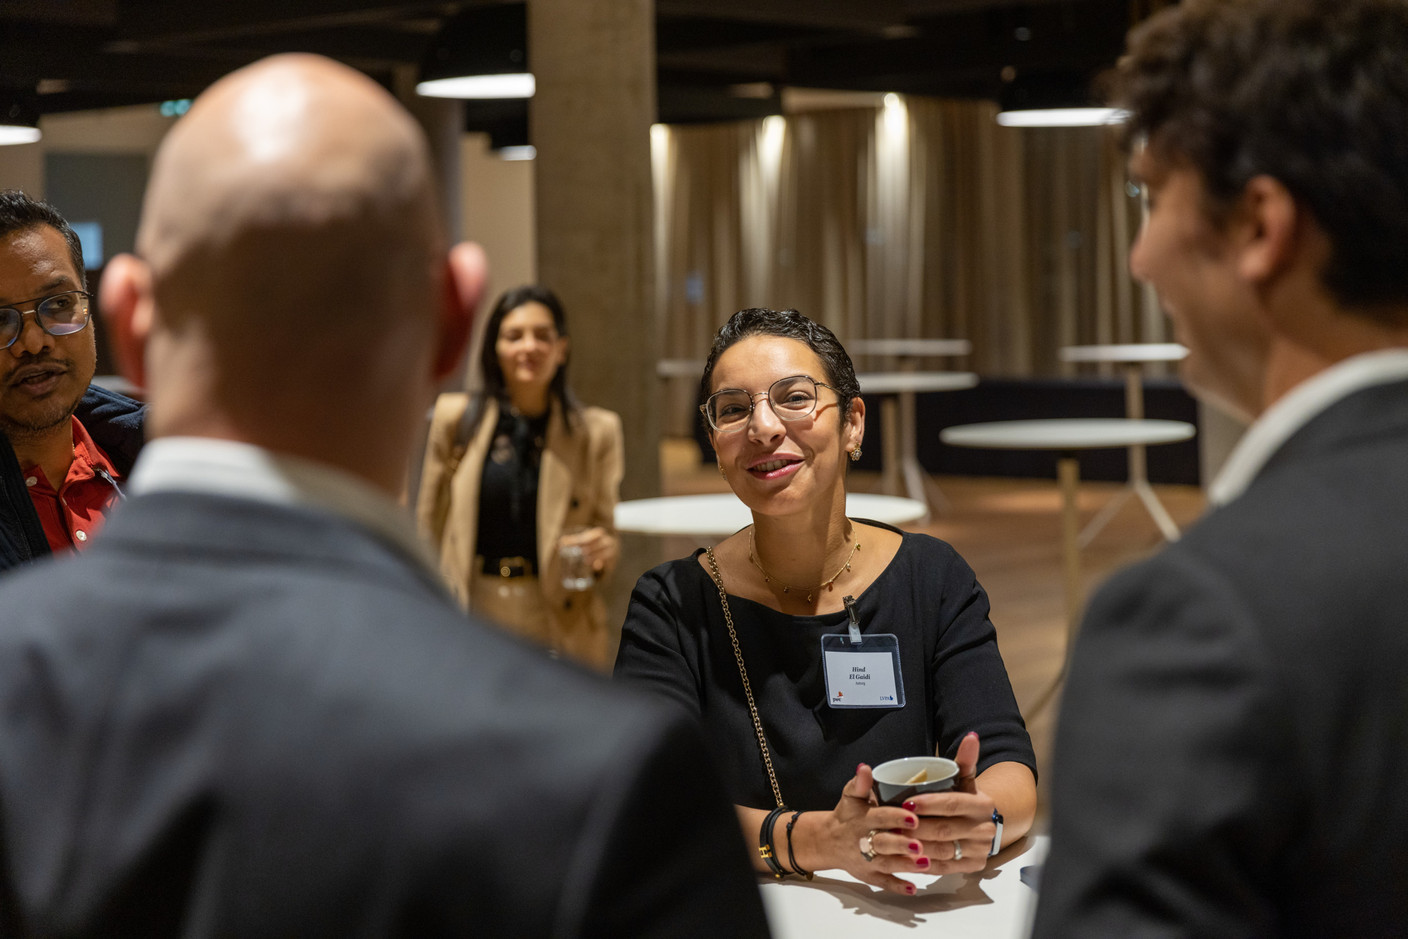 Hind El Gaidi, board vice president and head of valuation, financial information and marketing at Astorg, at the LVPA launch event. Romain Gamba